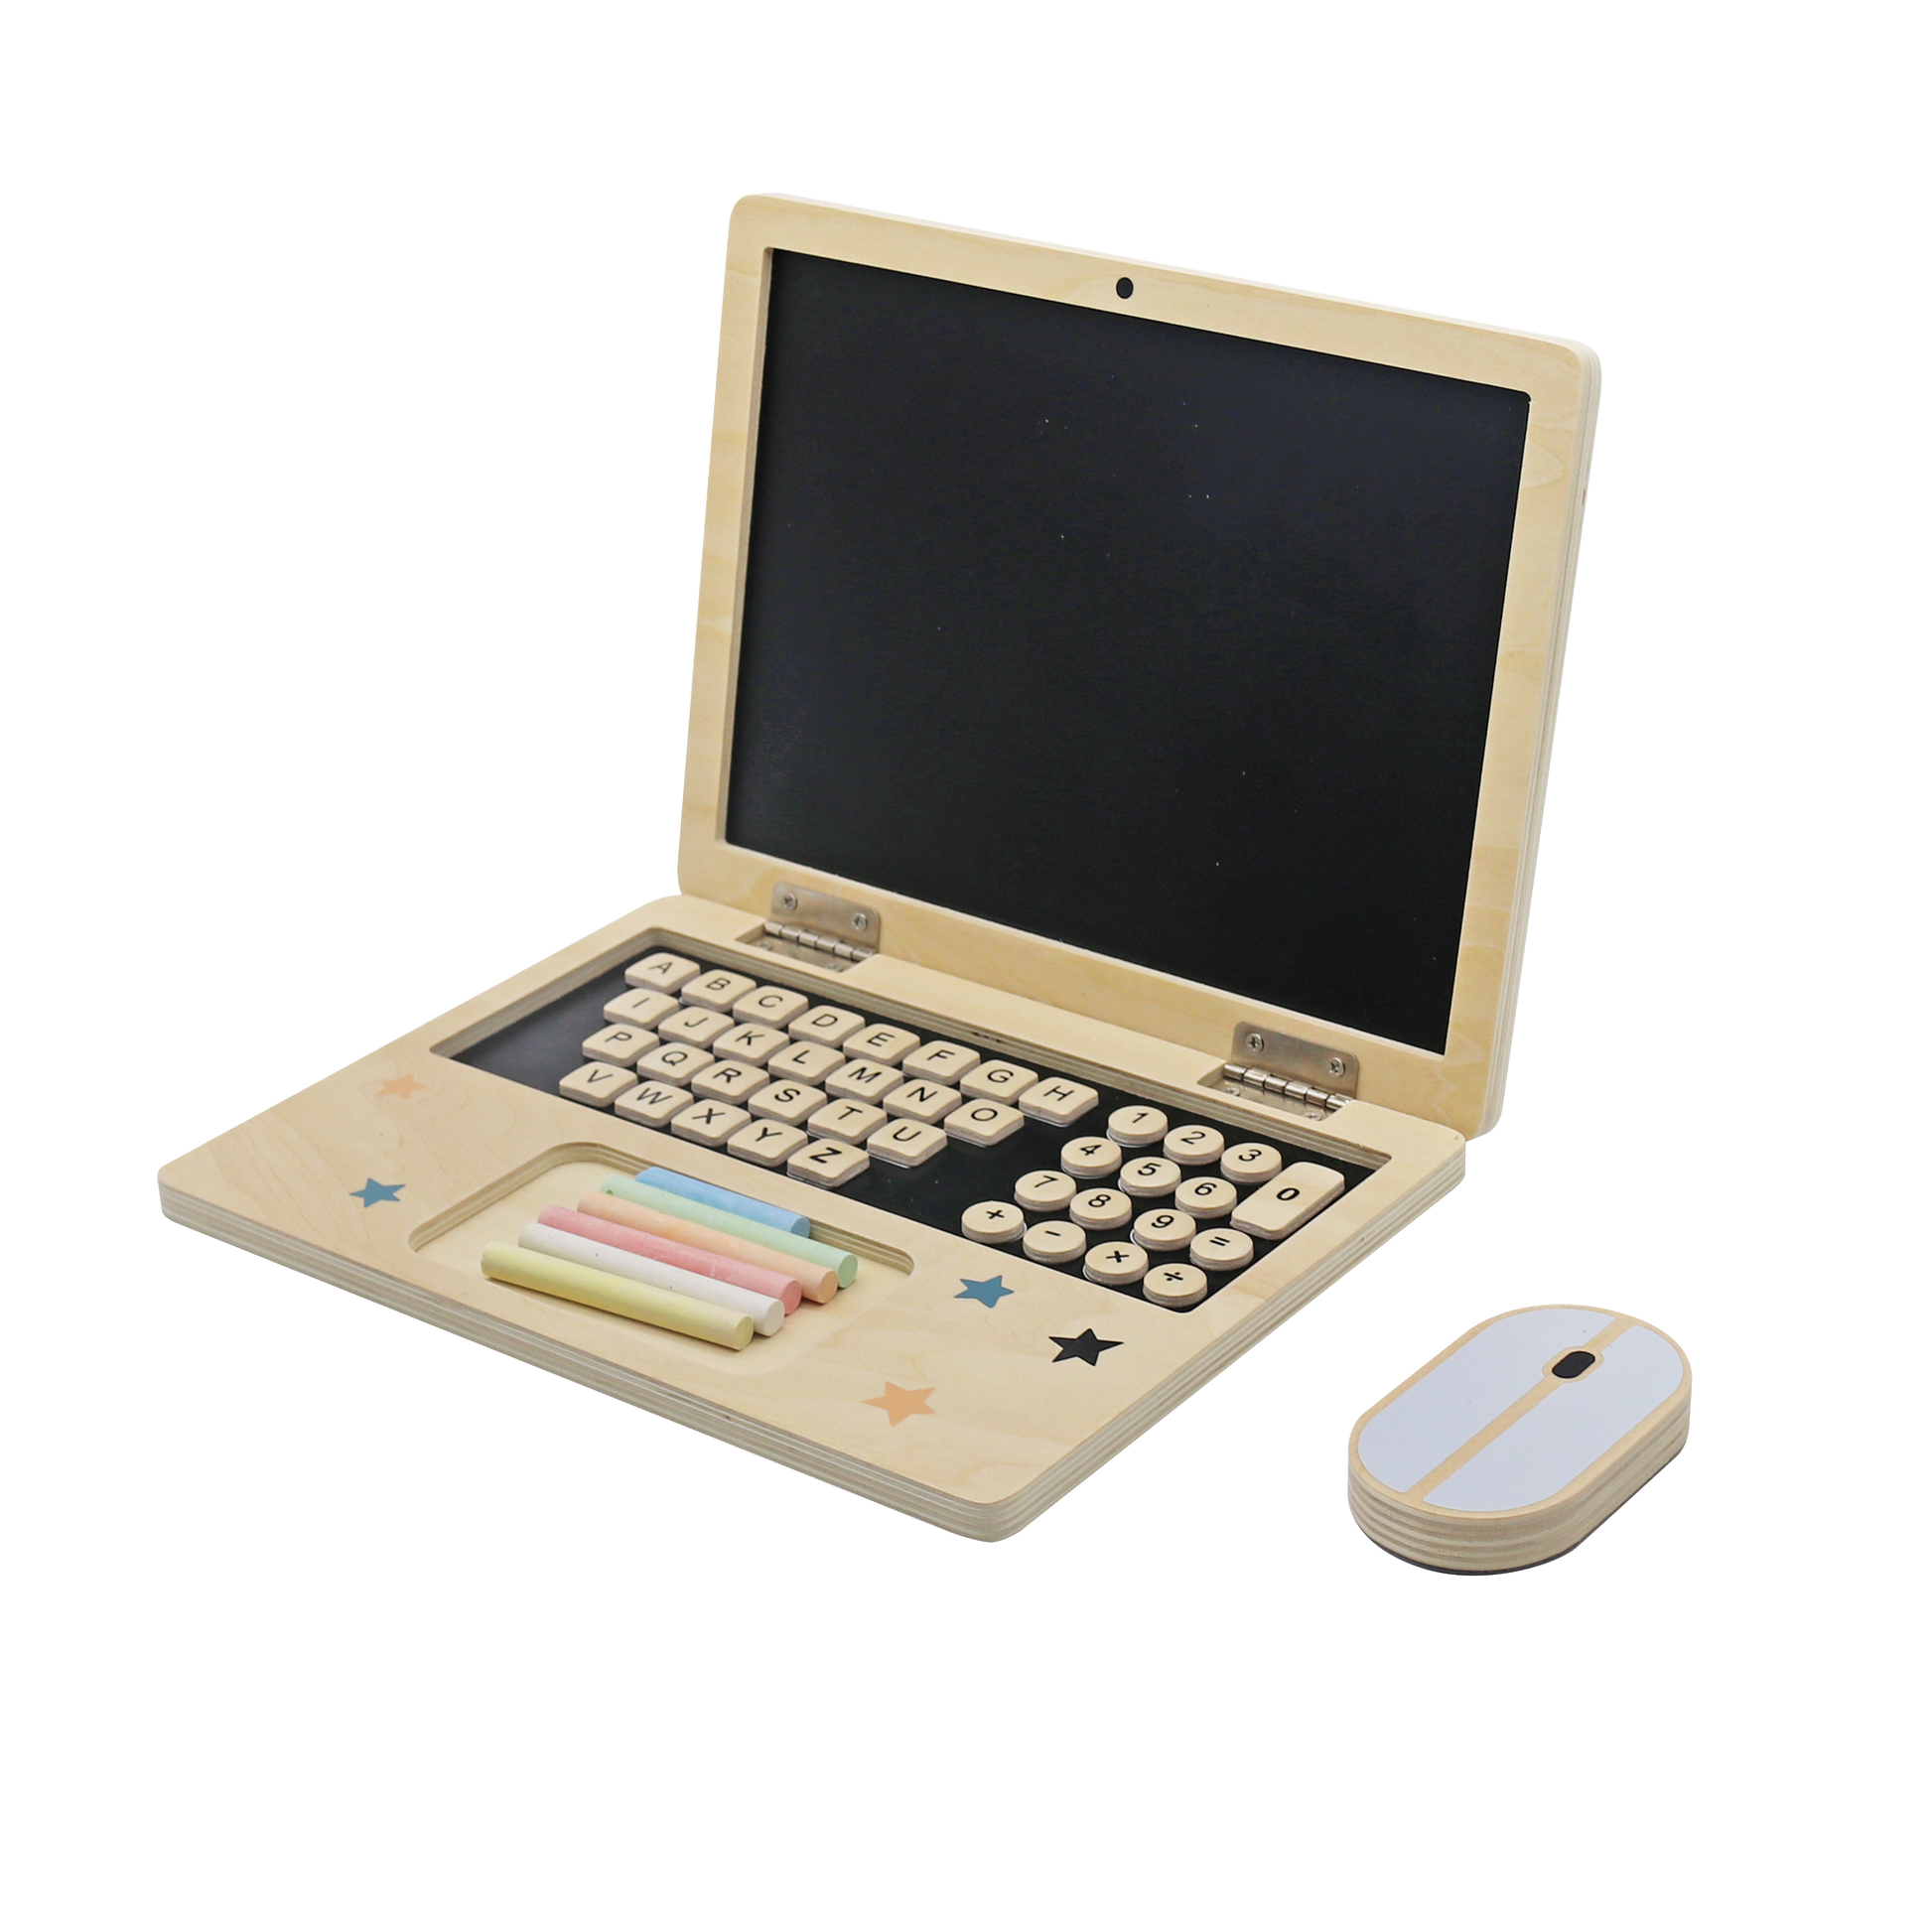 Wooden laptop toy set with keyboard magnetic buttons, chalks and duster mouse for endless fun and imaginative play!